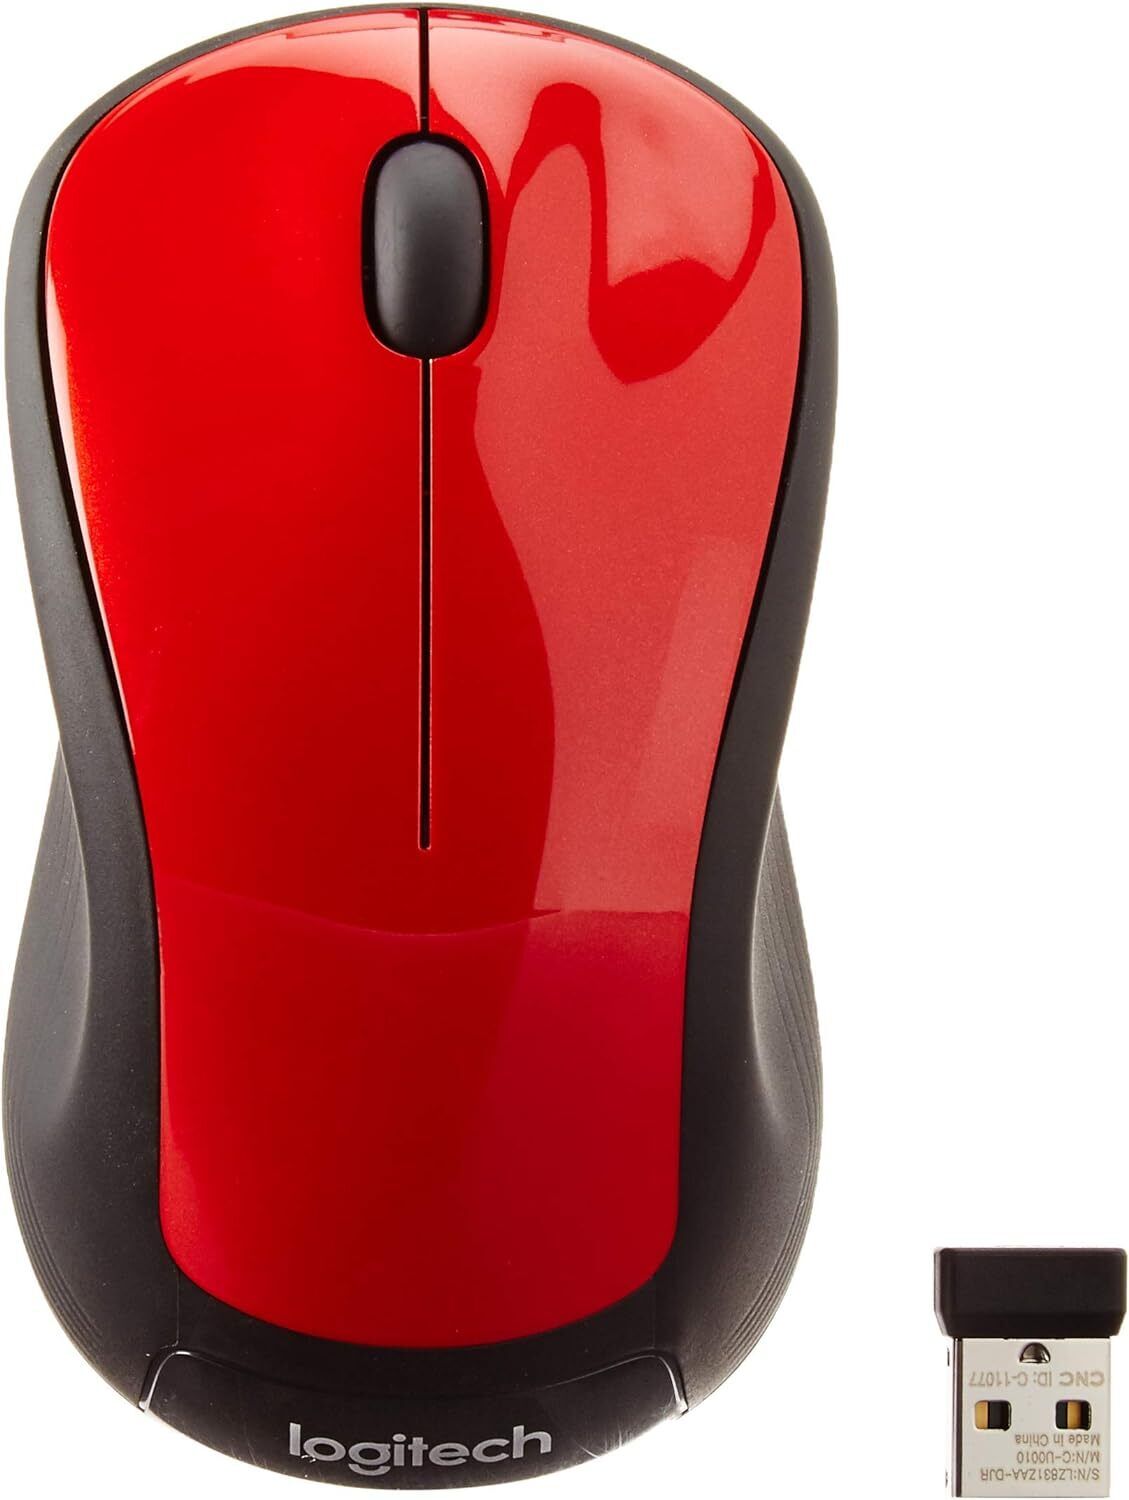 Logitech M310 Wireless Laser Mouse with USB Receiver - Red